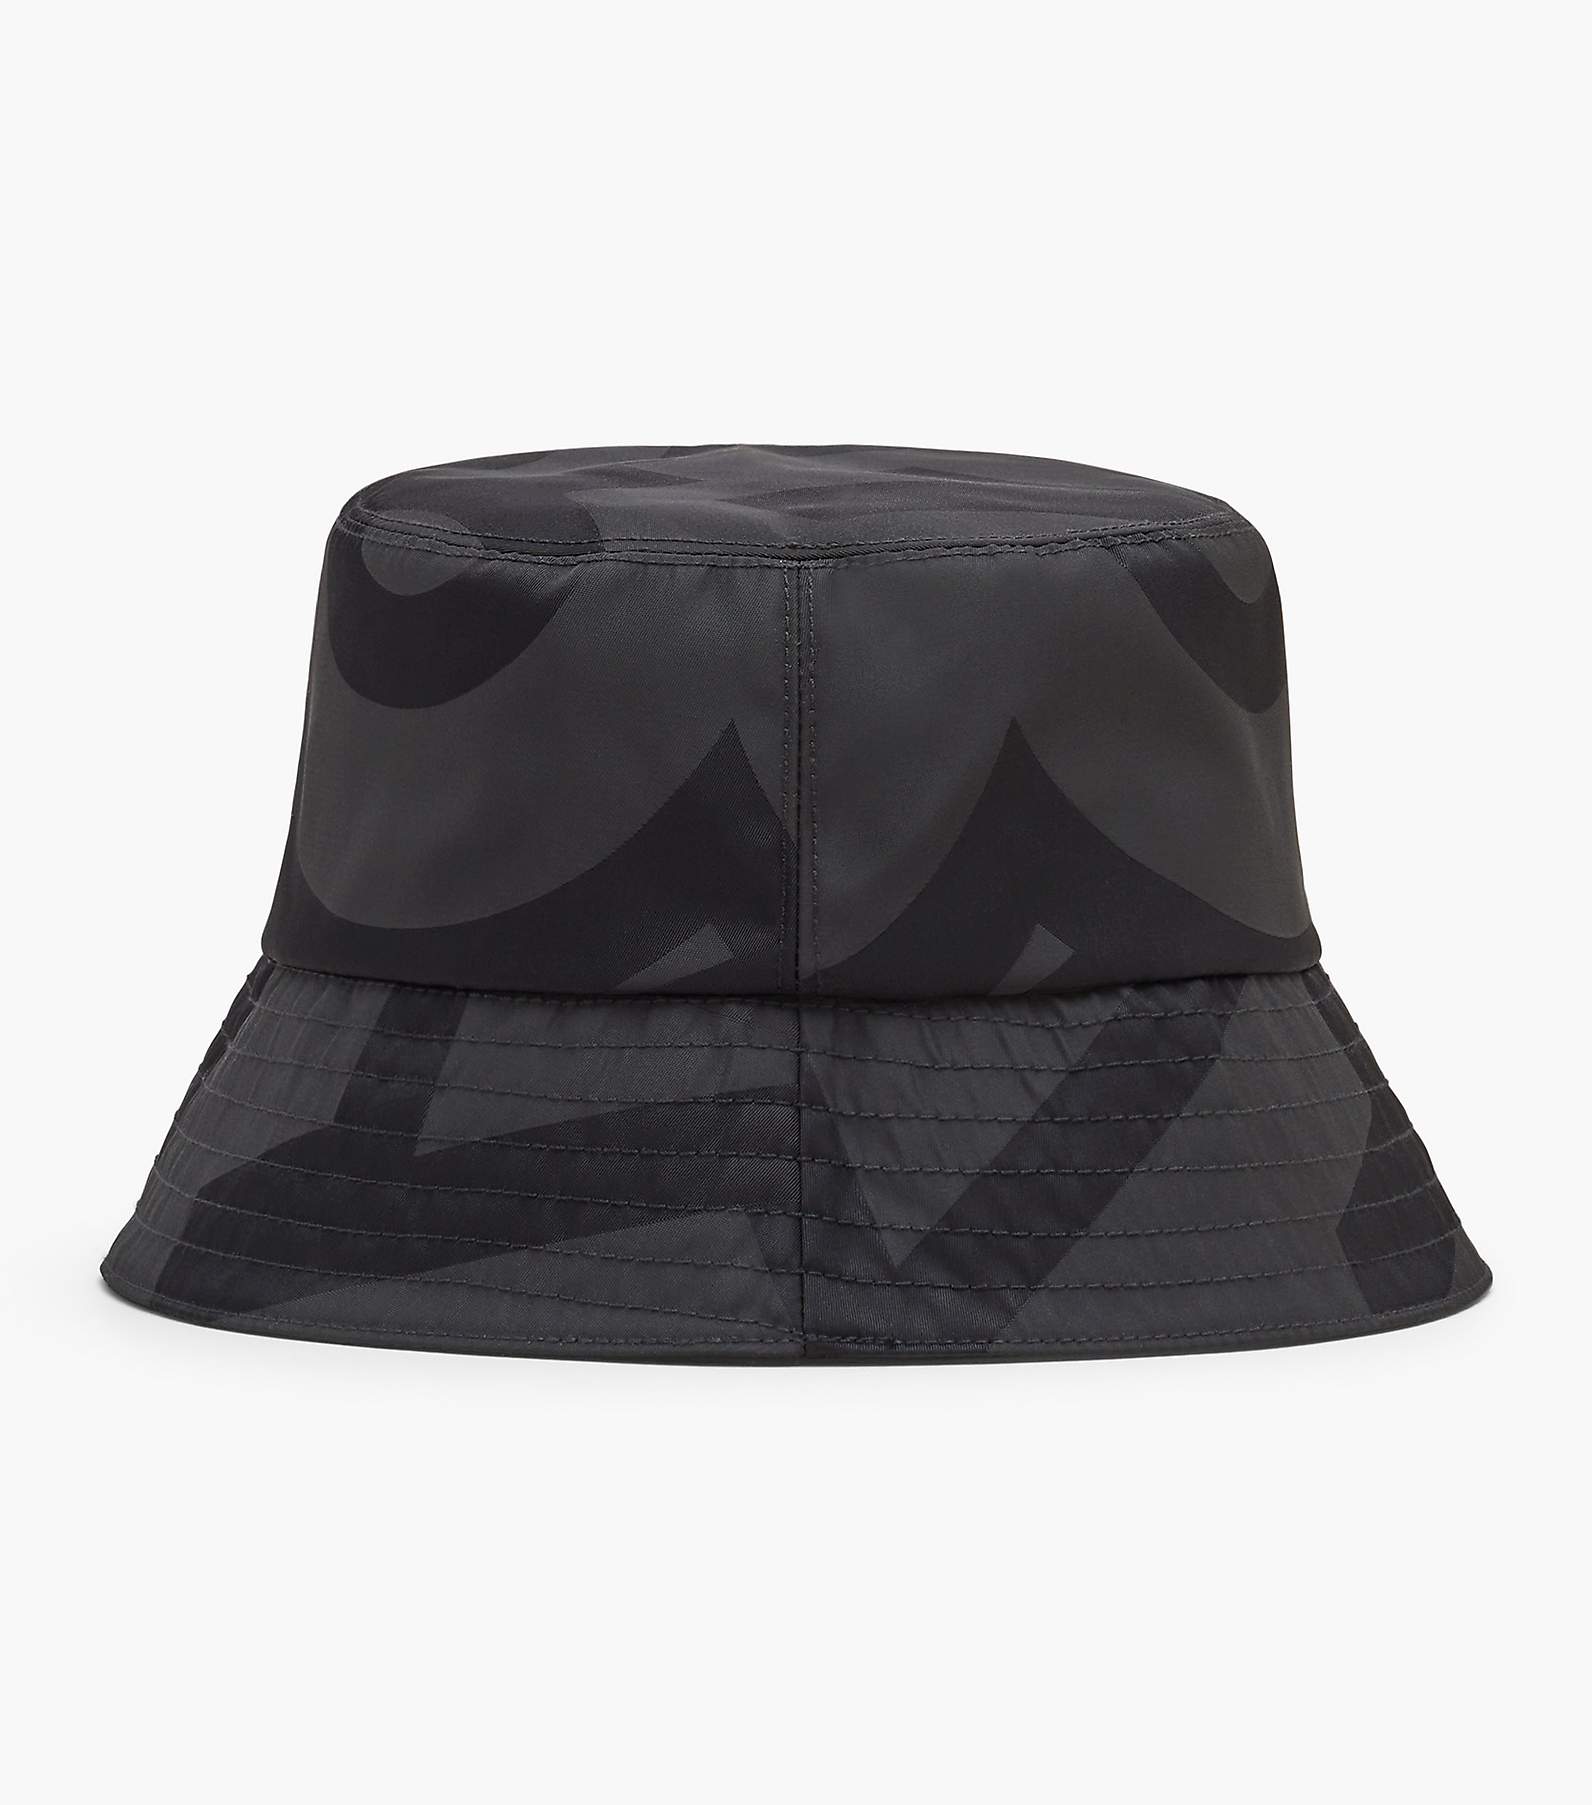 Mens Gucci monogrammed bucket hat size M black pre owned good condition